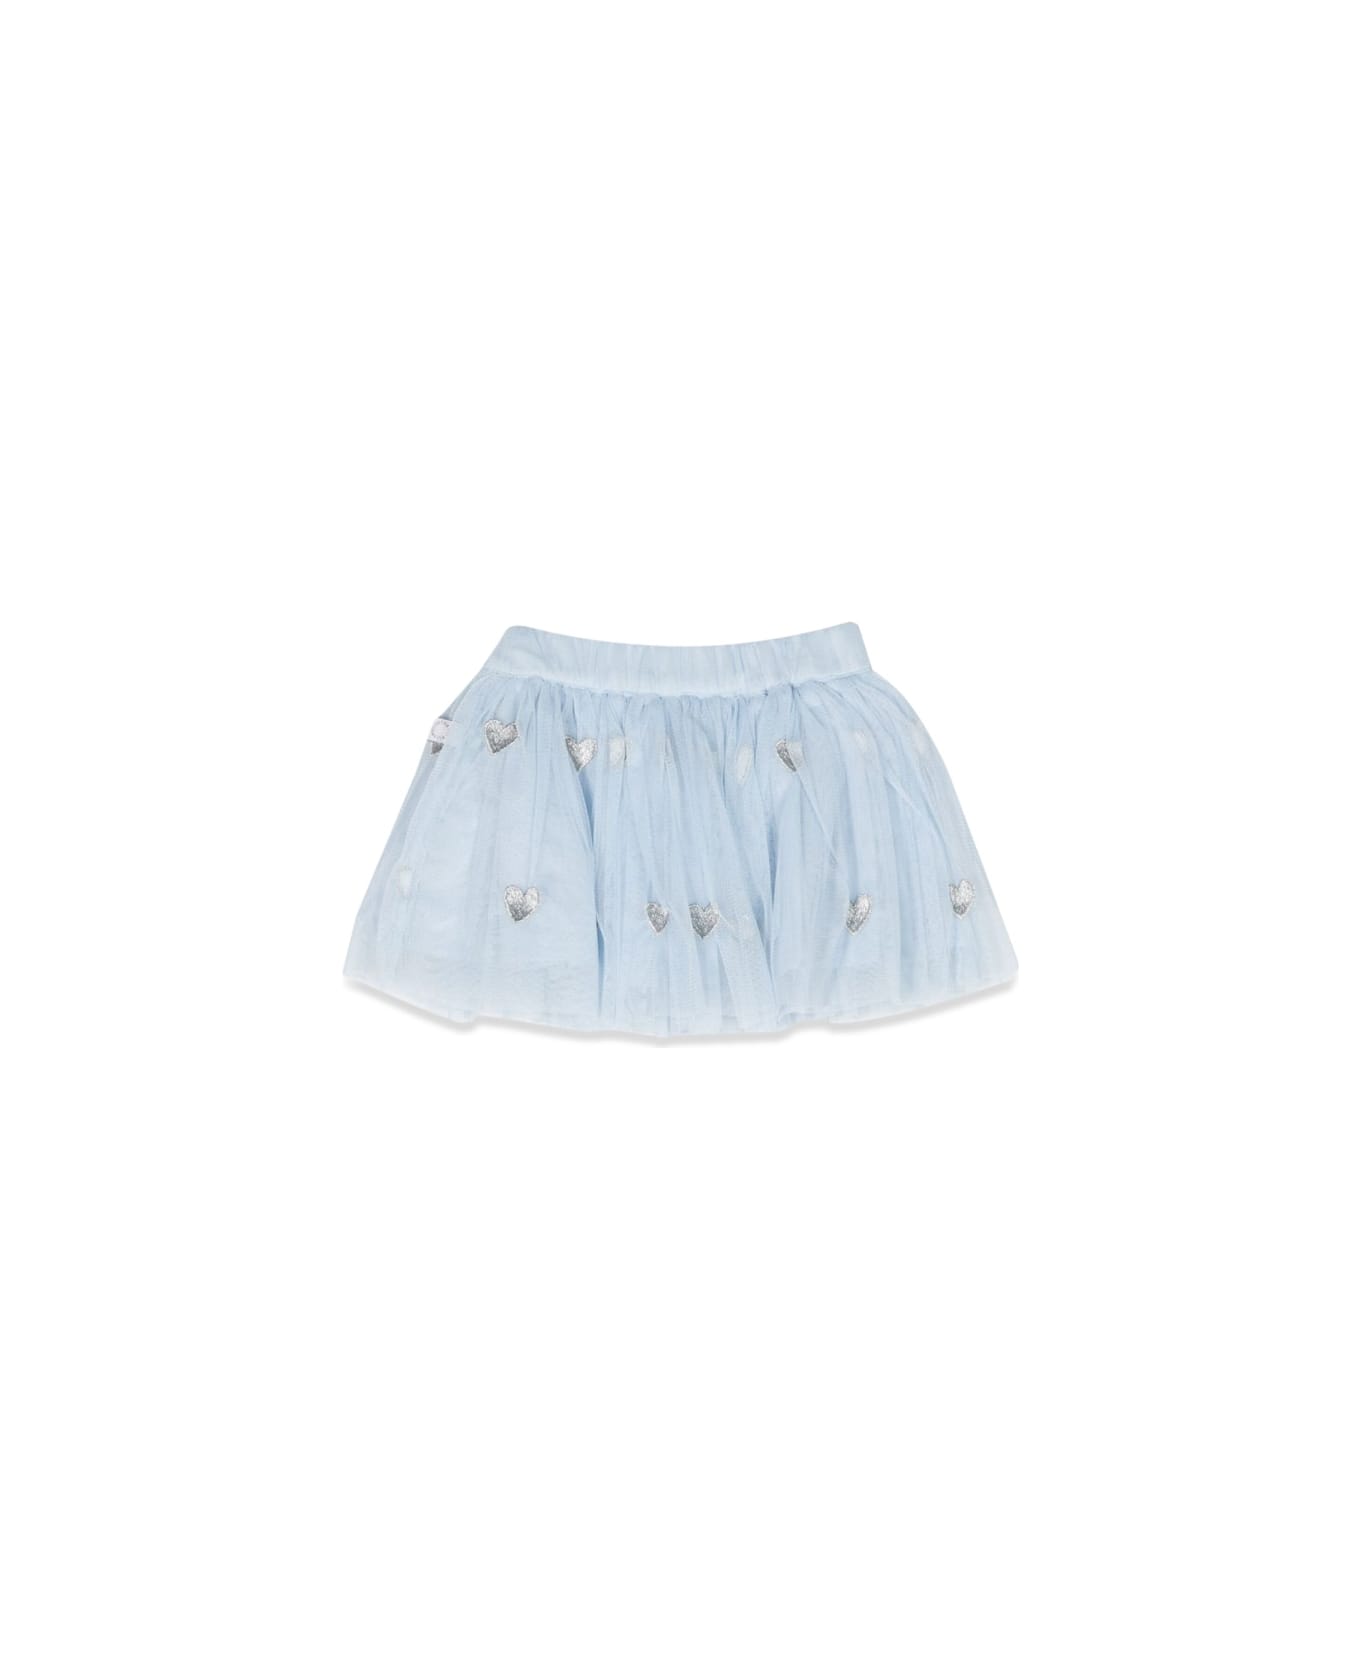 Stella McCartney Kids Skirt With Embroidery - BABY BLUE ボトムス